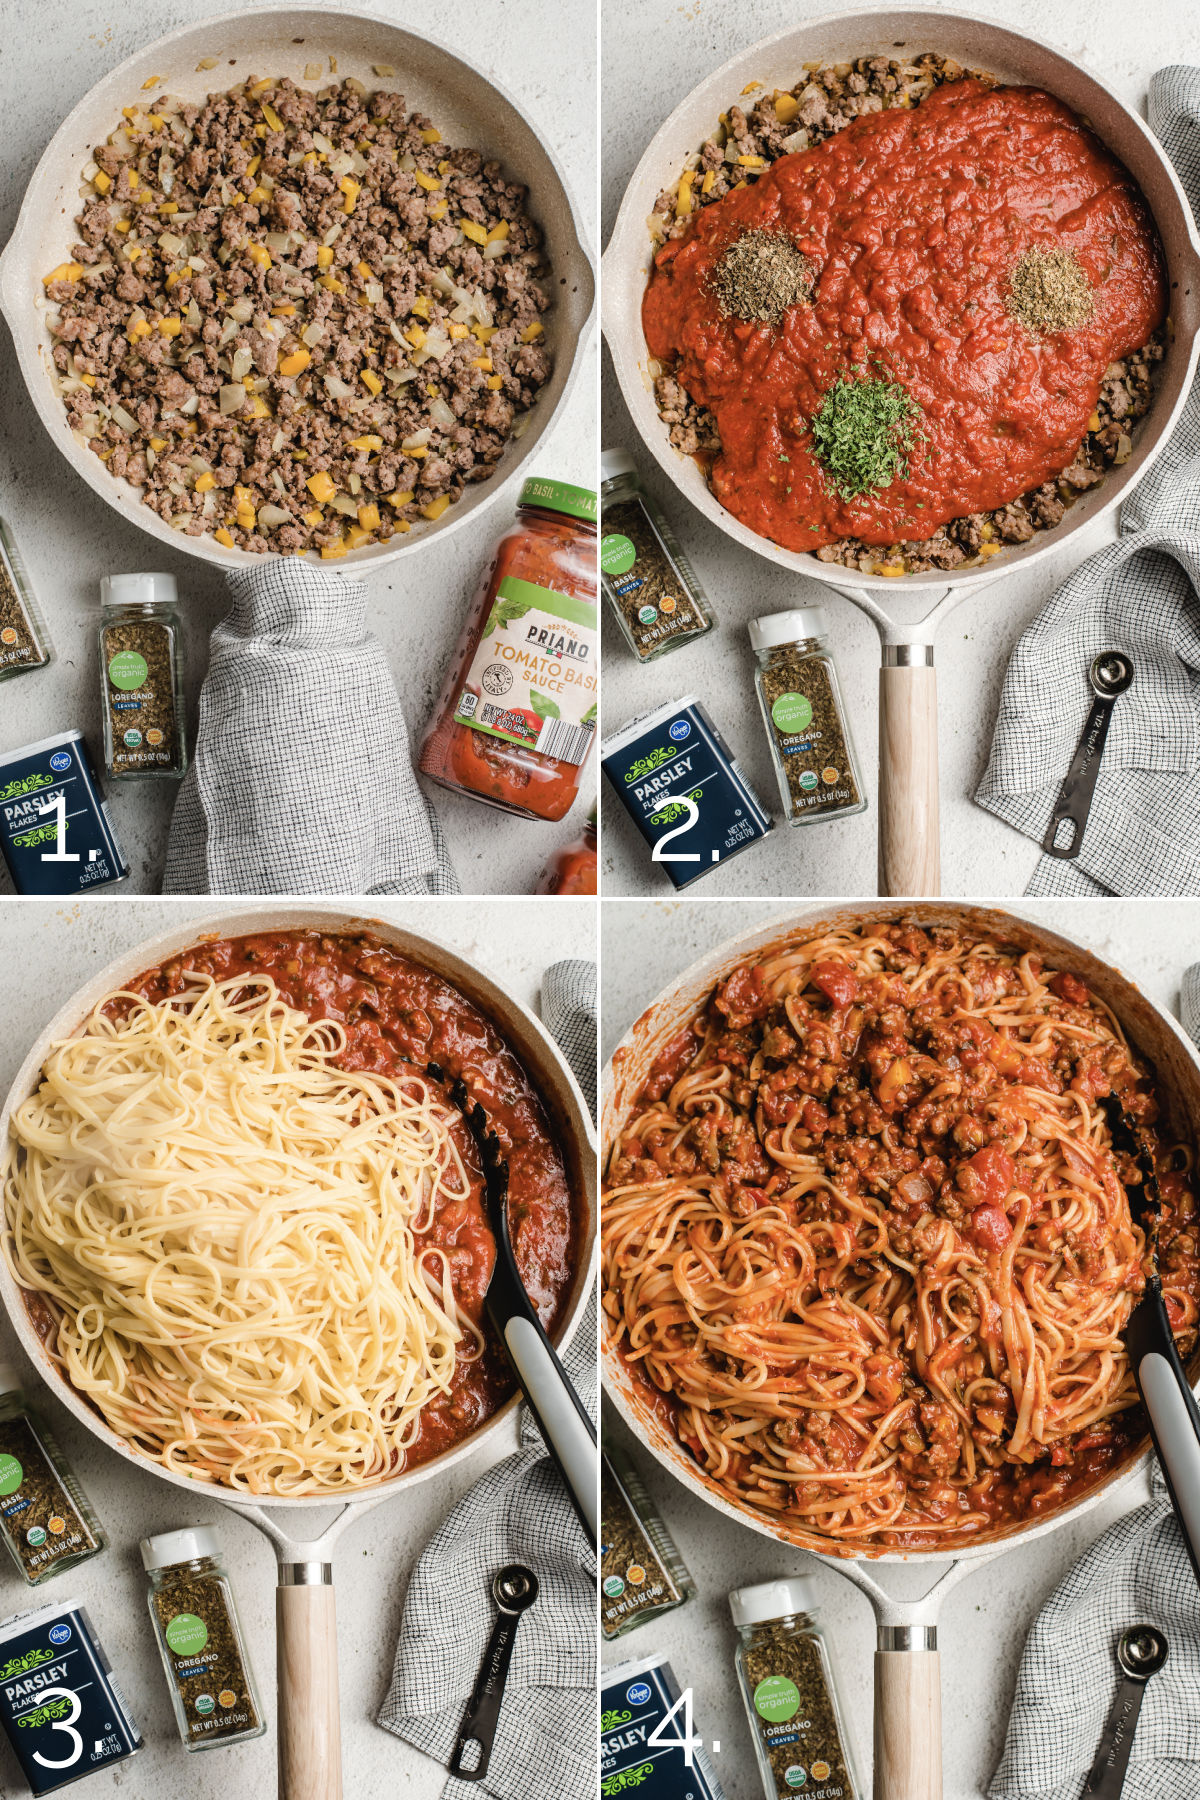 Step by step images of spaghetti casserole being made: a pan with sauteed ground beef and onions, the same pan with the addition of spaghetti sauce, adding spaghetti, and finally, the sauce and spaghetti all mixed up.